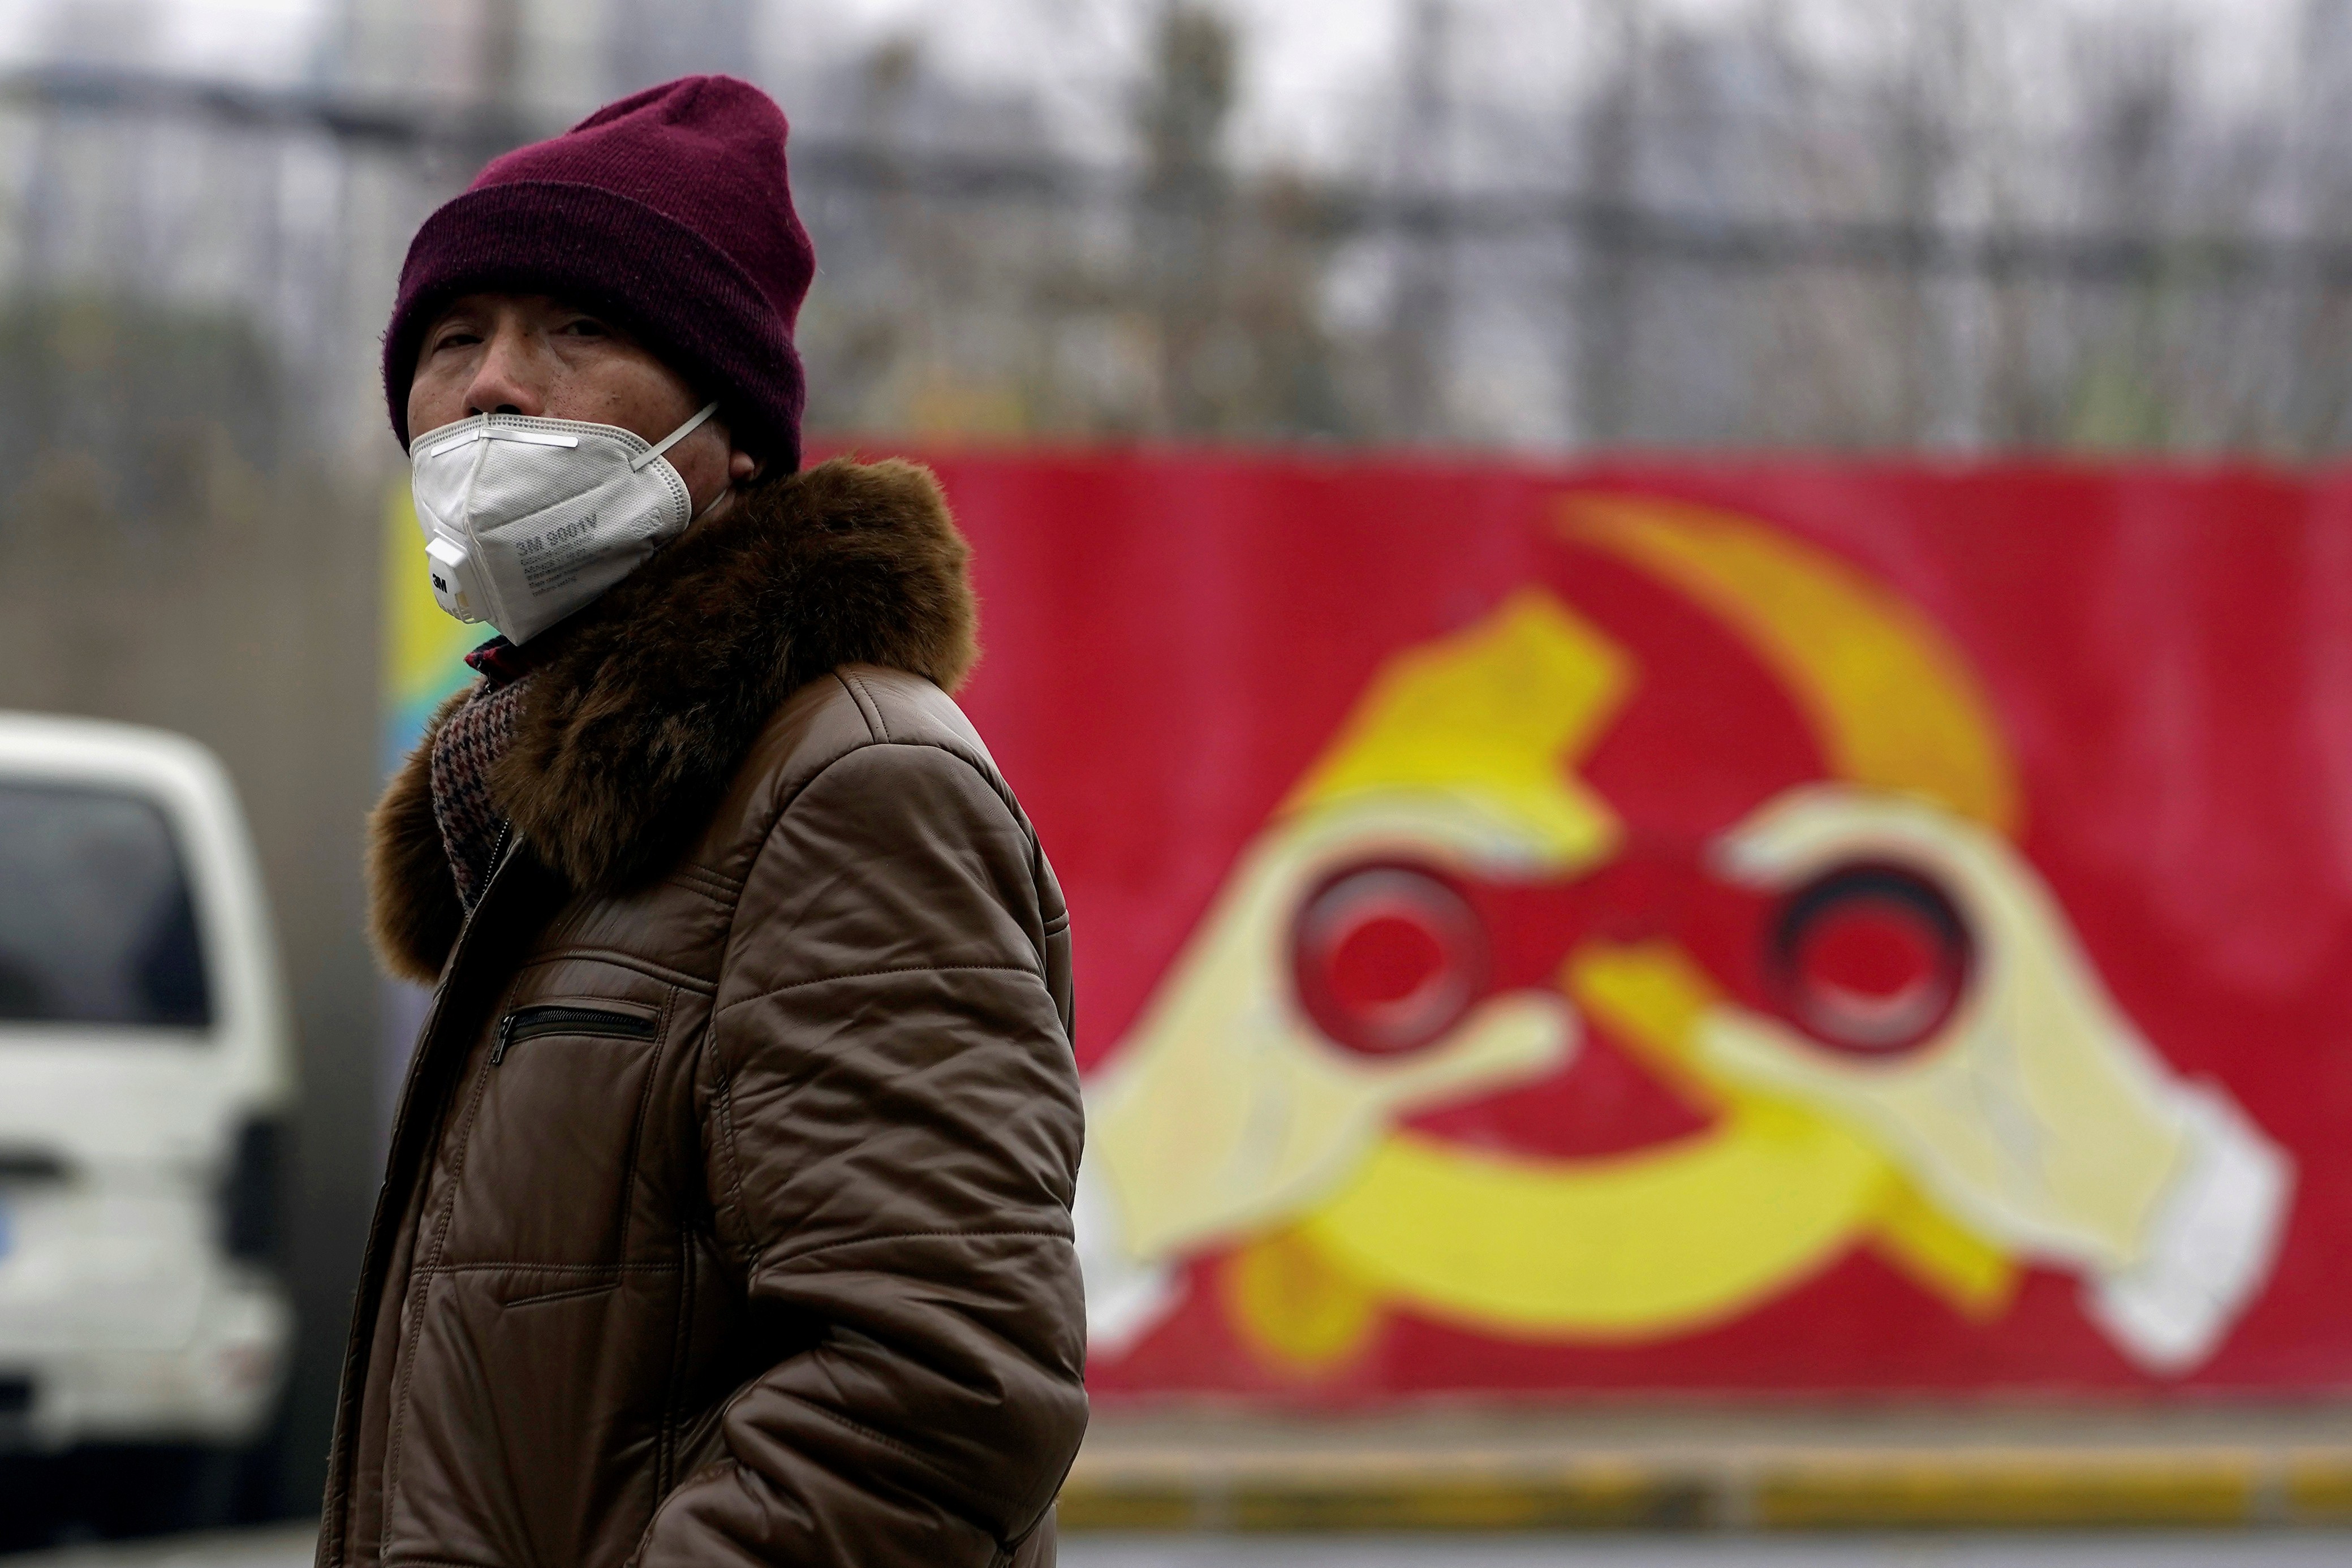 A man wearing a mask walks past a mural showing a modified image of the Communist Party emblem in Shanghai. Photo: Reuters